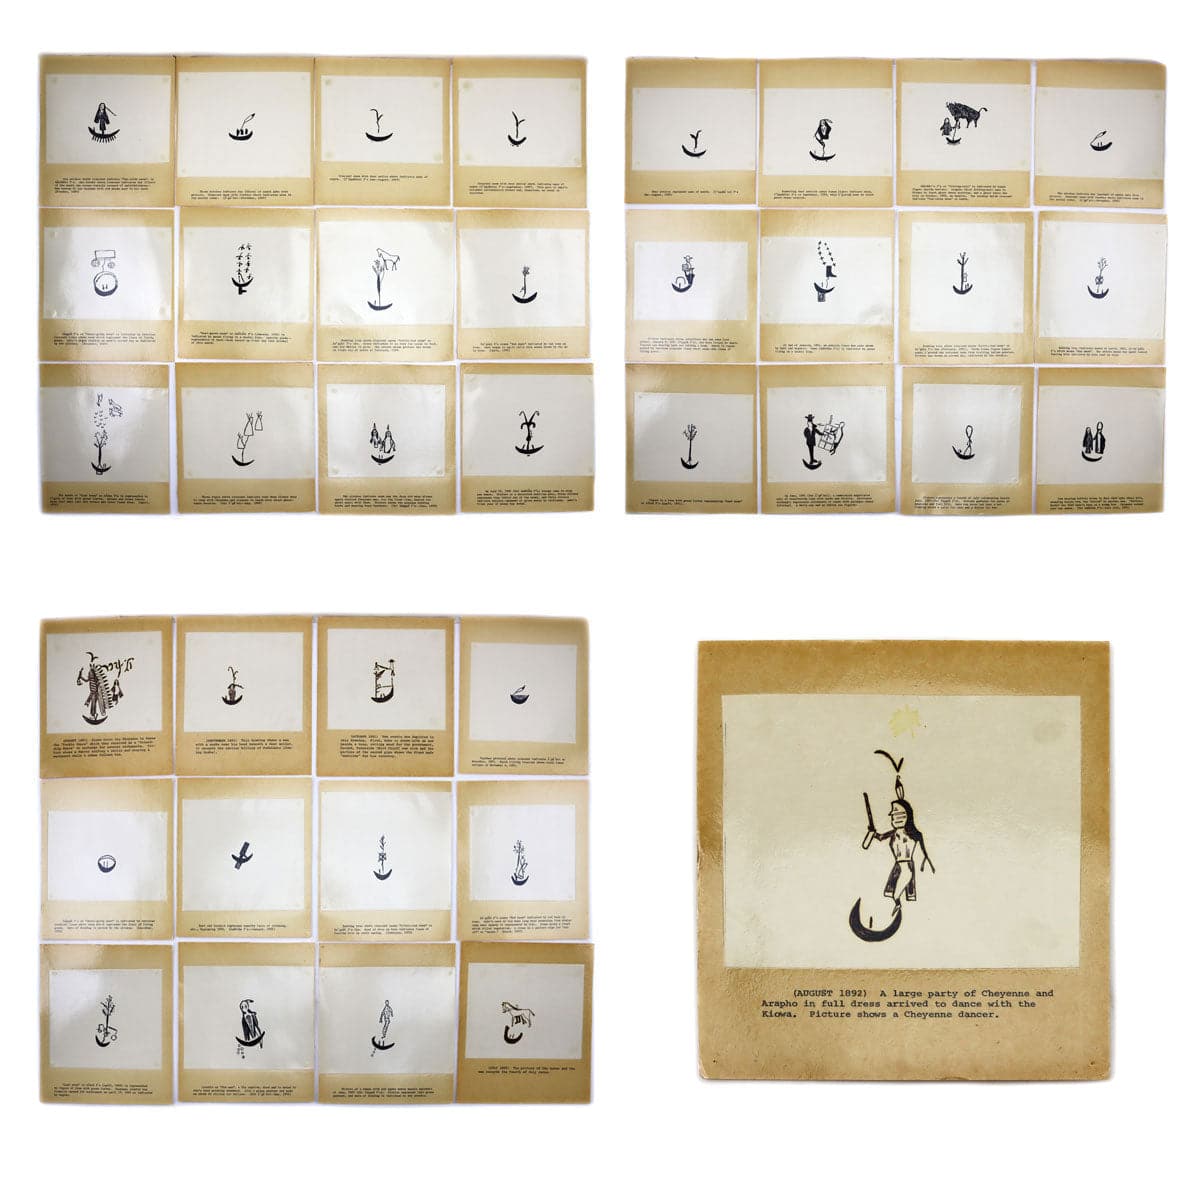 Group of 56 Original Kiowa Drawings, 120 Anko Calendar Drawings, and 13 Vinyl Records of Songs Arranged and Sung by Various Singers of the Southern and Northern Plains Tribes (M90218C-0621-001)20